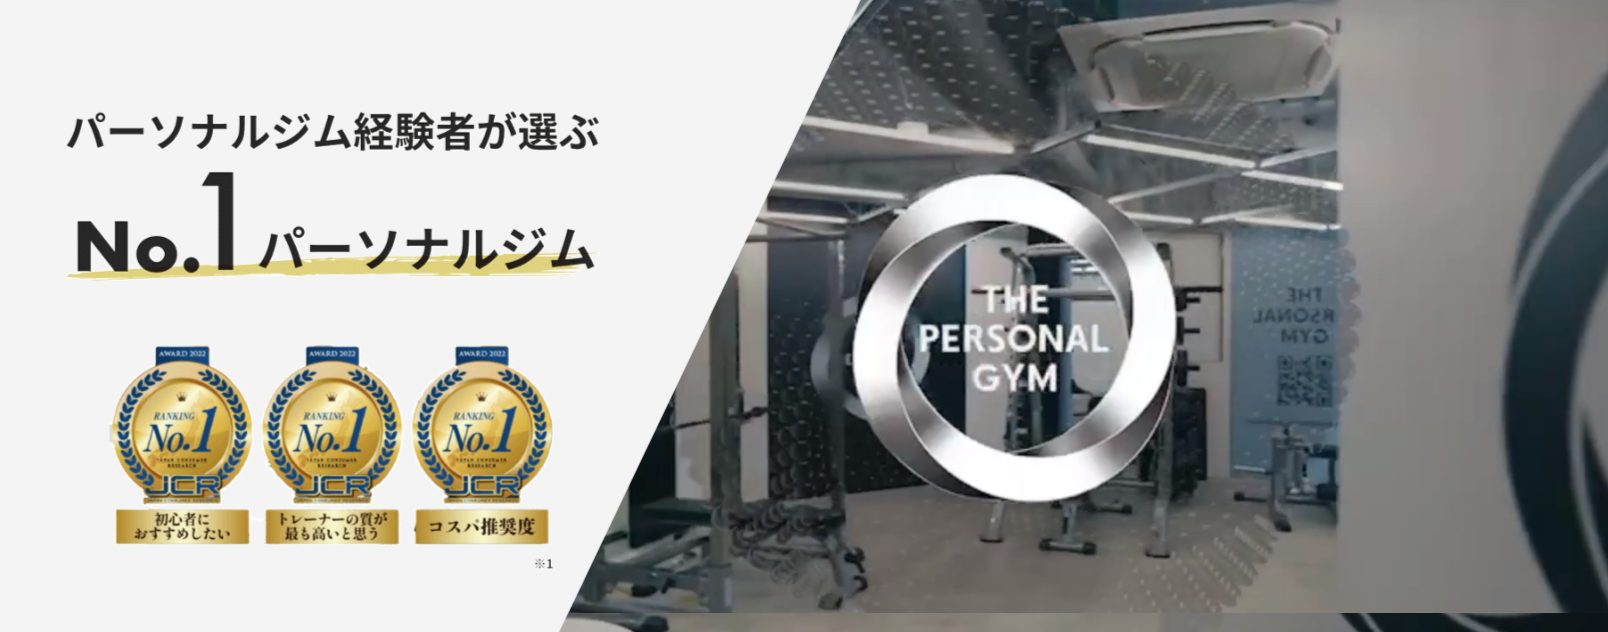 THE-PERSONAL-GYM公式画像